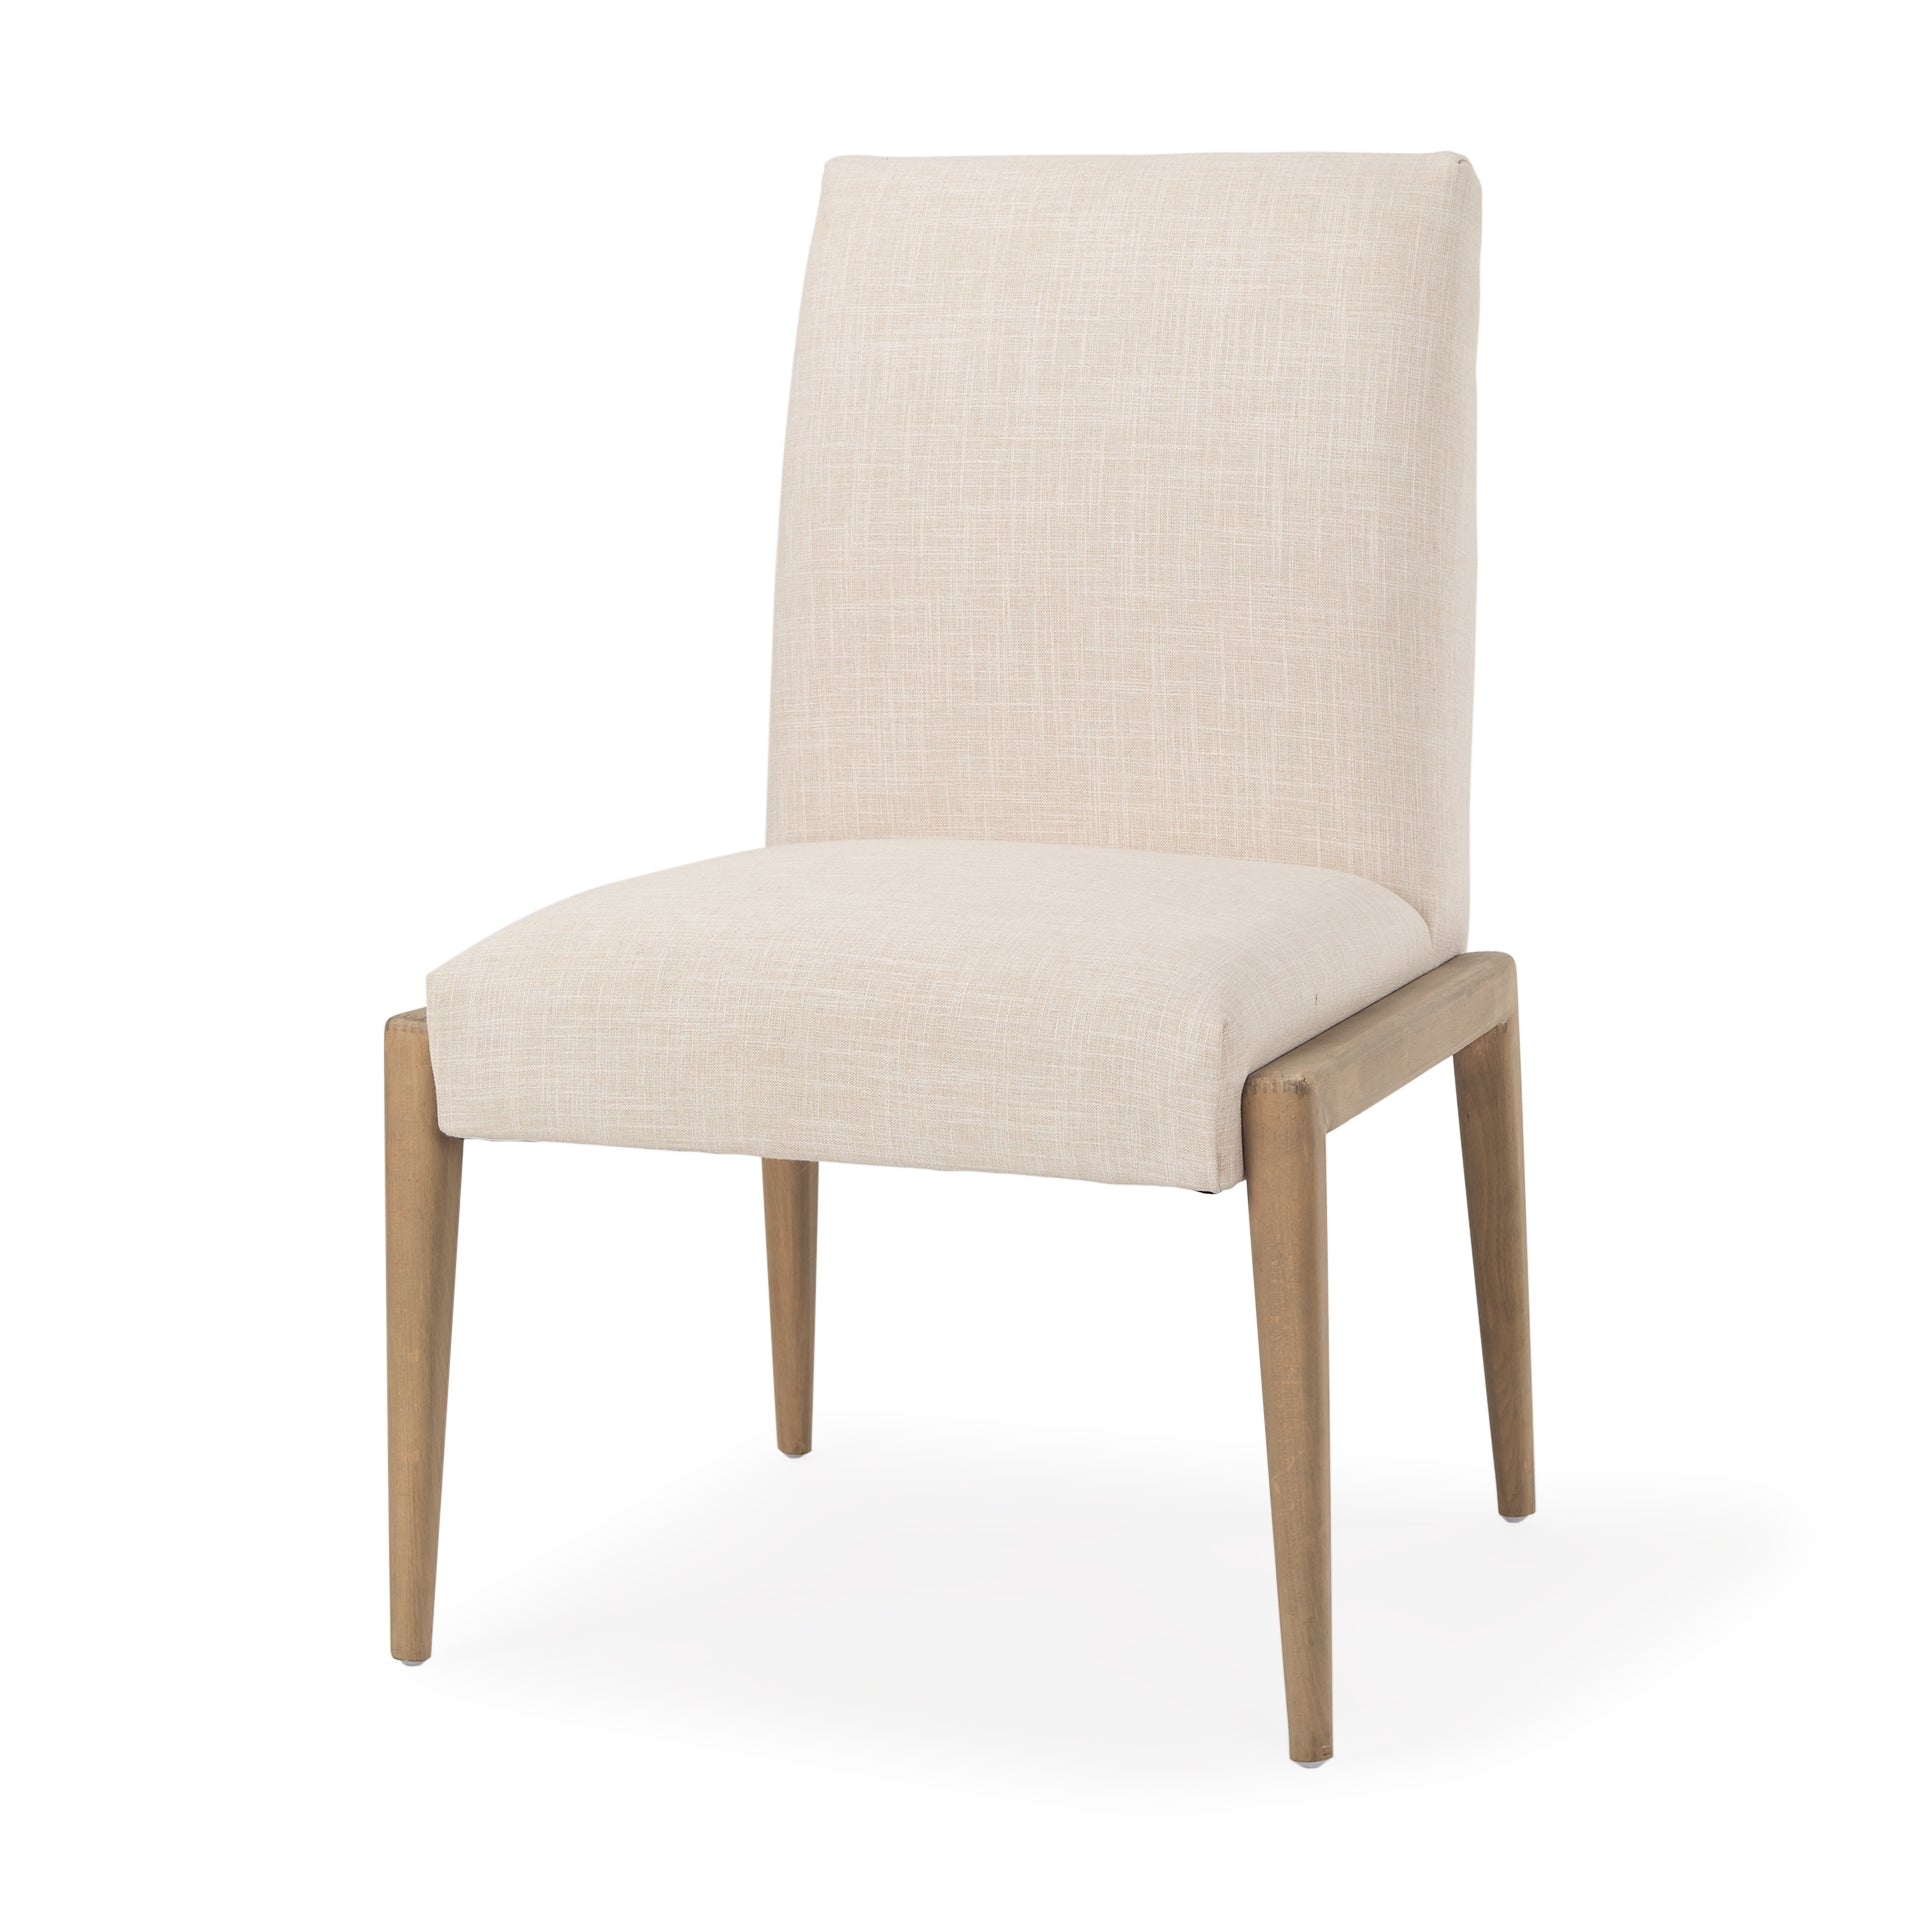 PALISADES ARMLESS CREAM DINING CHAIR - SET OF 2